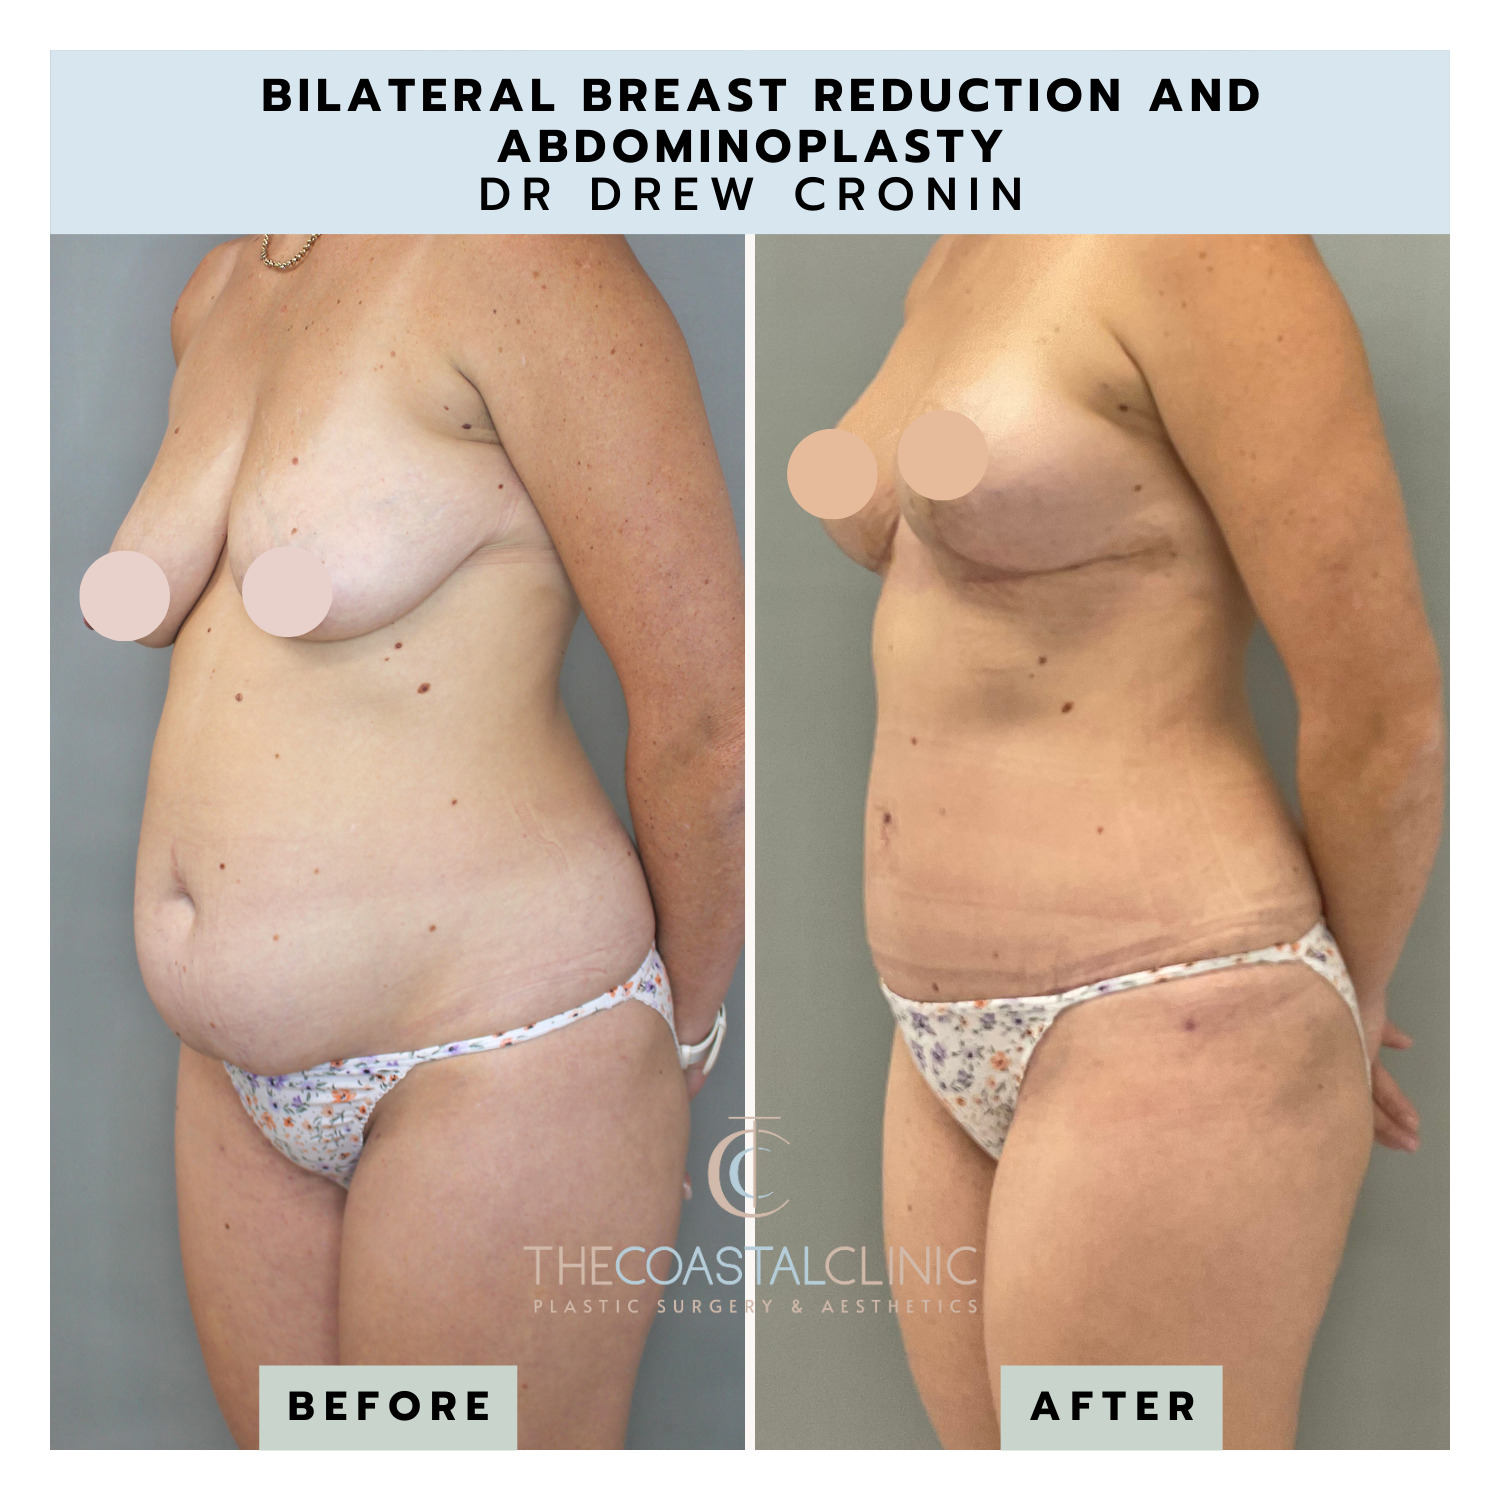 Breast reduction before and after in Australia.